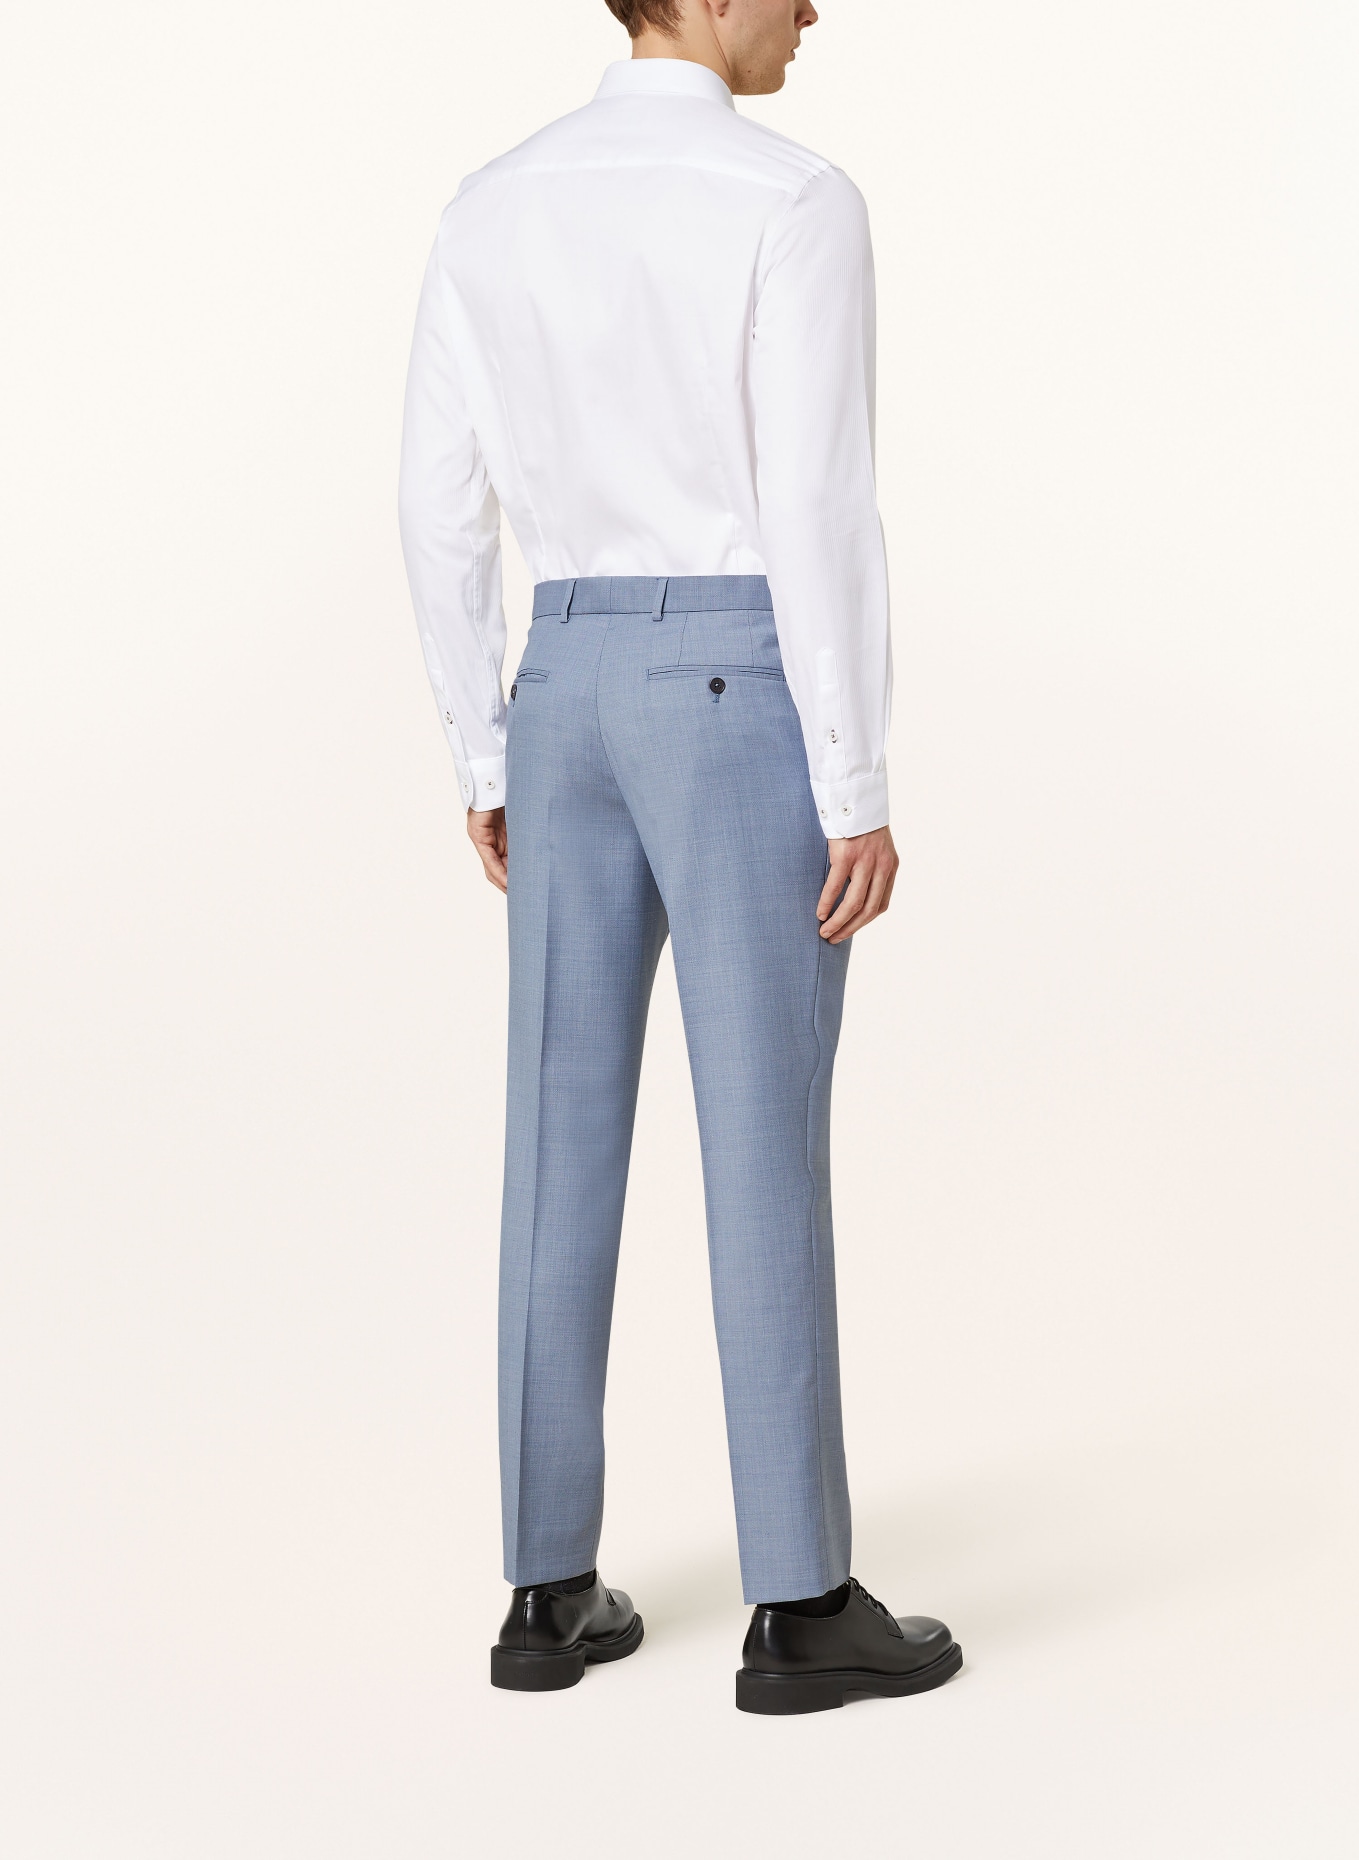 TED BAKER Anzughose ORIONT Slim Fit, Farbe: BLUE BLUE (Bild 4)